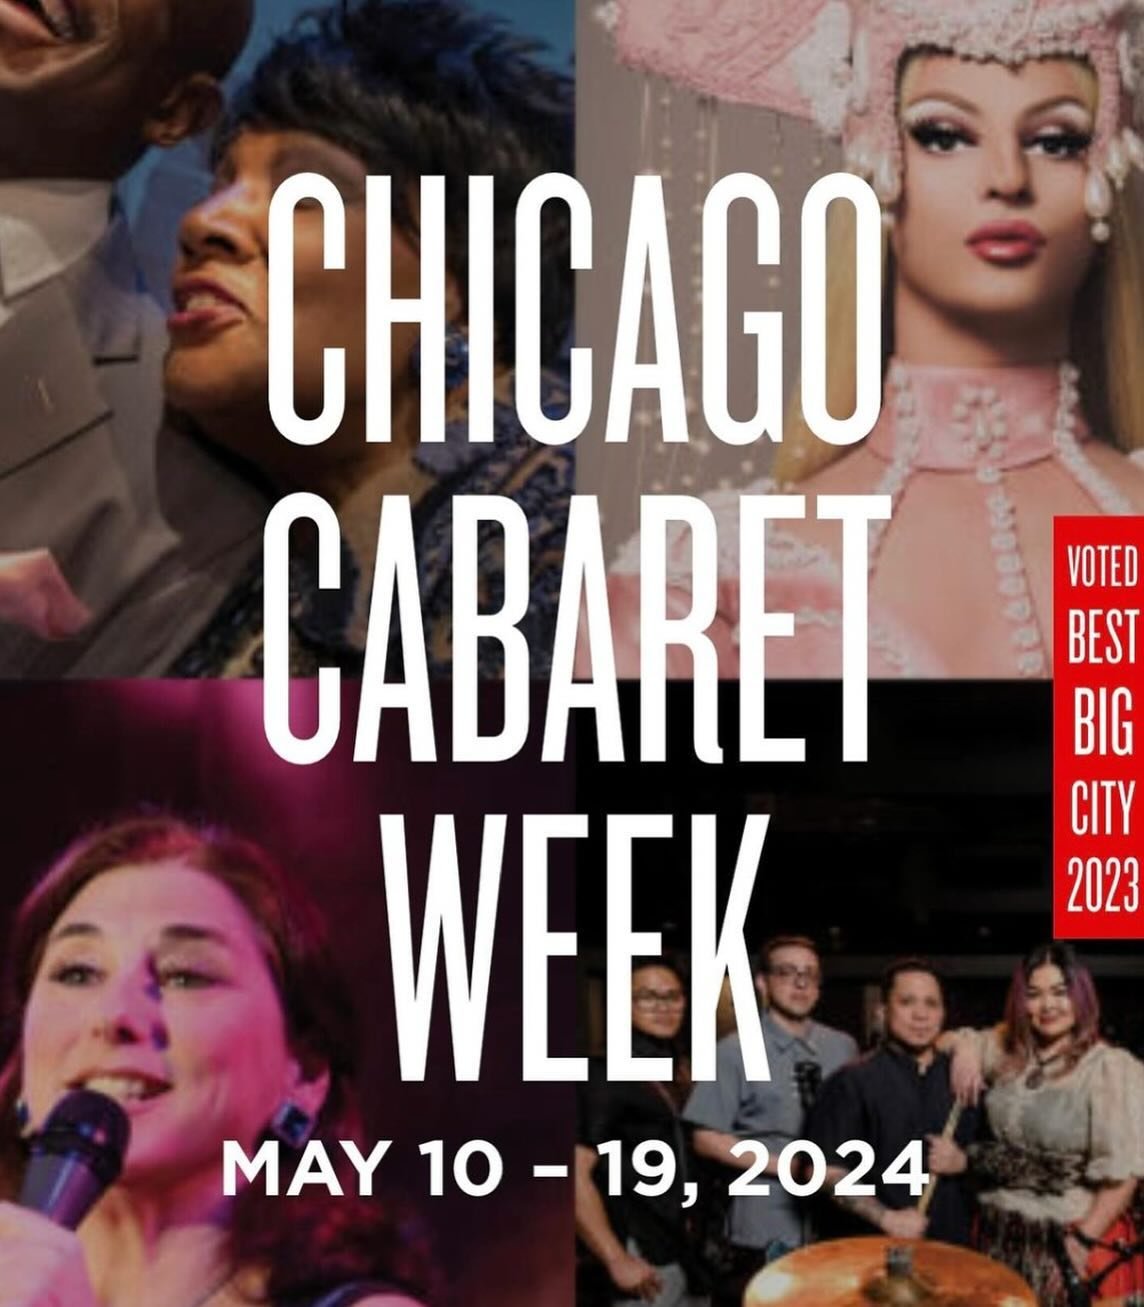 Join the Big Gay Cabaret&rsquo;s special guest @miz_cracker star of RuPaul&rsquo;s Drag Race for Chicago Cabaret Week!

This ten-day festival features a lineup of Chicago&rsquo;s top cabaret artists performing blues, Broadway, burlesque, jazz, R&amp;